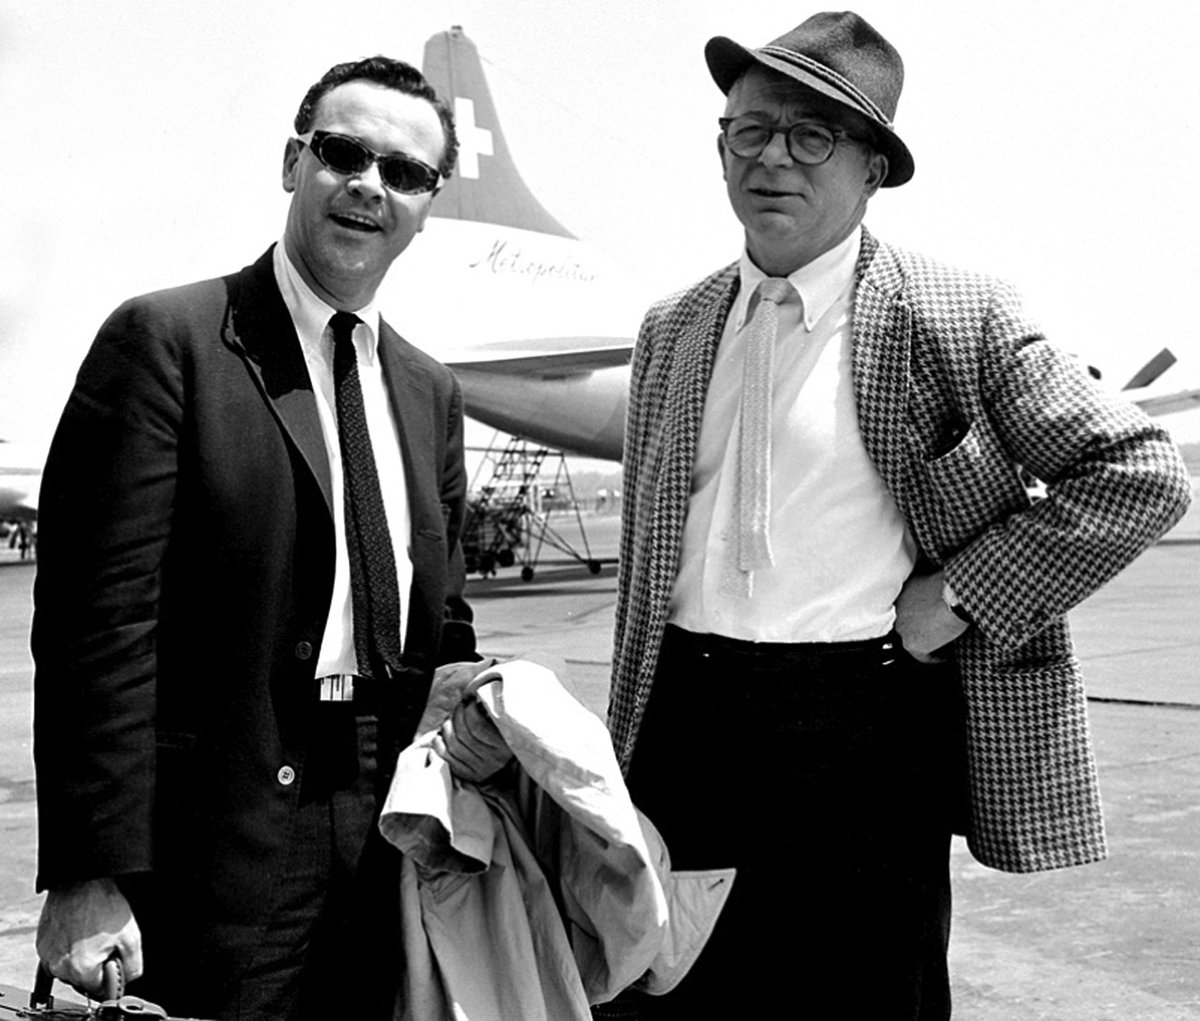 Jack Lemmon and director Billy Wilder arrive in Germany on a publicity tour for their latest film, “Some Like It Hot” which also stars Marilyn Monroe and Tony Curtis, Frankfurt, Germany, June 1959.